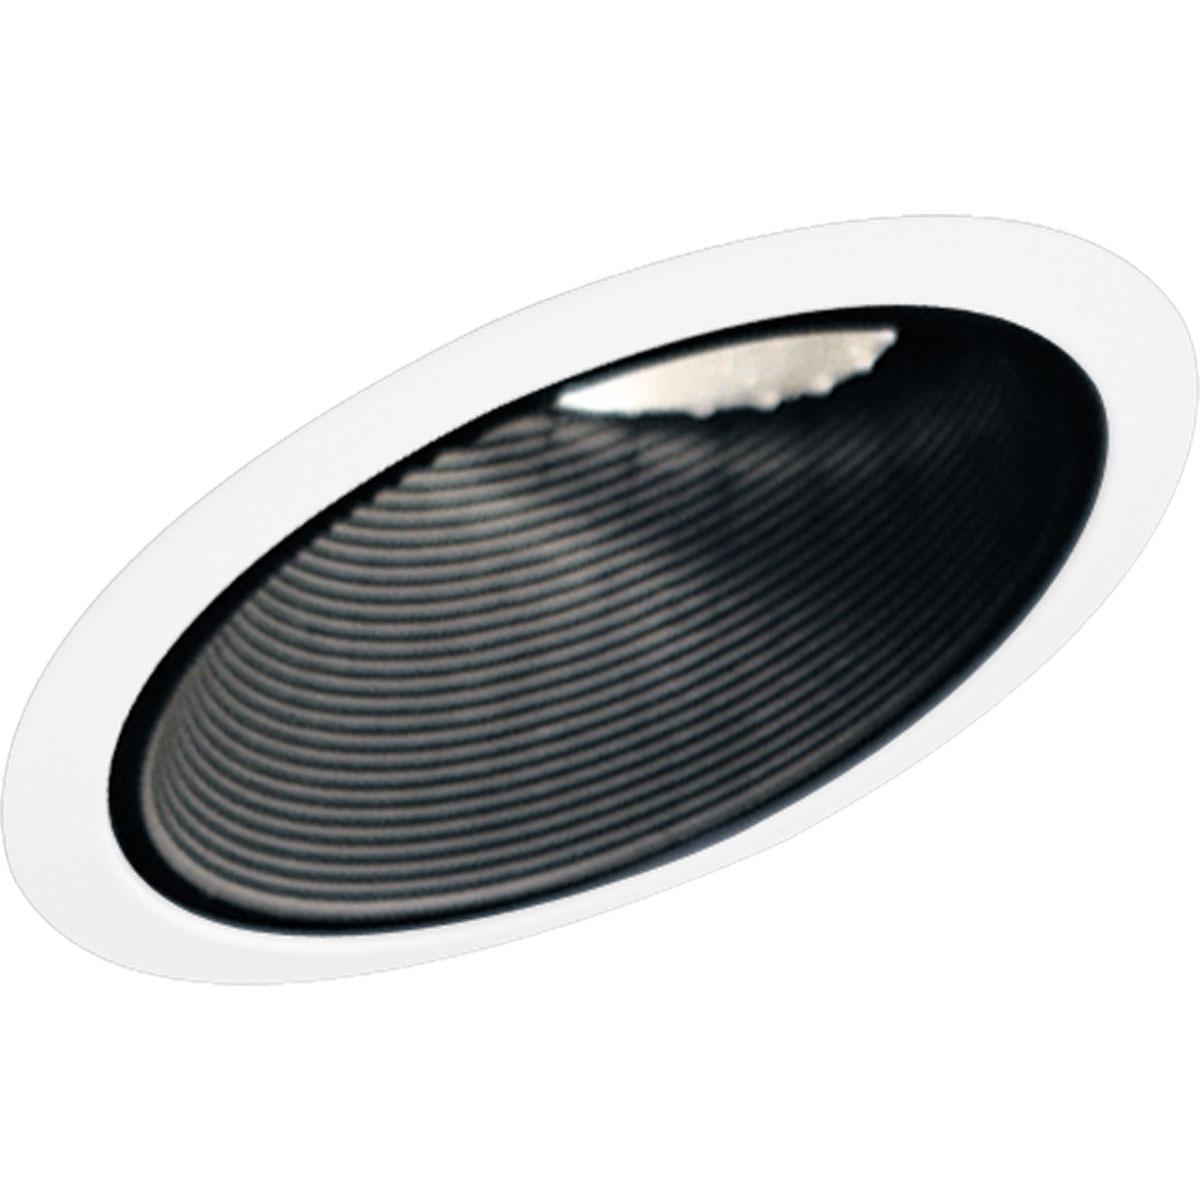 Hubbell P8004-31 Sloped ceiling baffle for insulated ceilings in a Black finish and bright white powder painted steel flange and ball.  ; Black finish. ; Bright white powder painted steel flange and ball. ; Covers irregular ceiling openings.